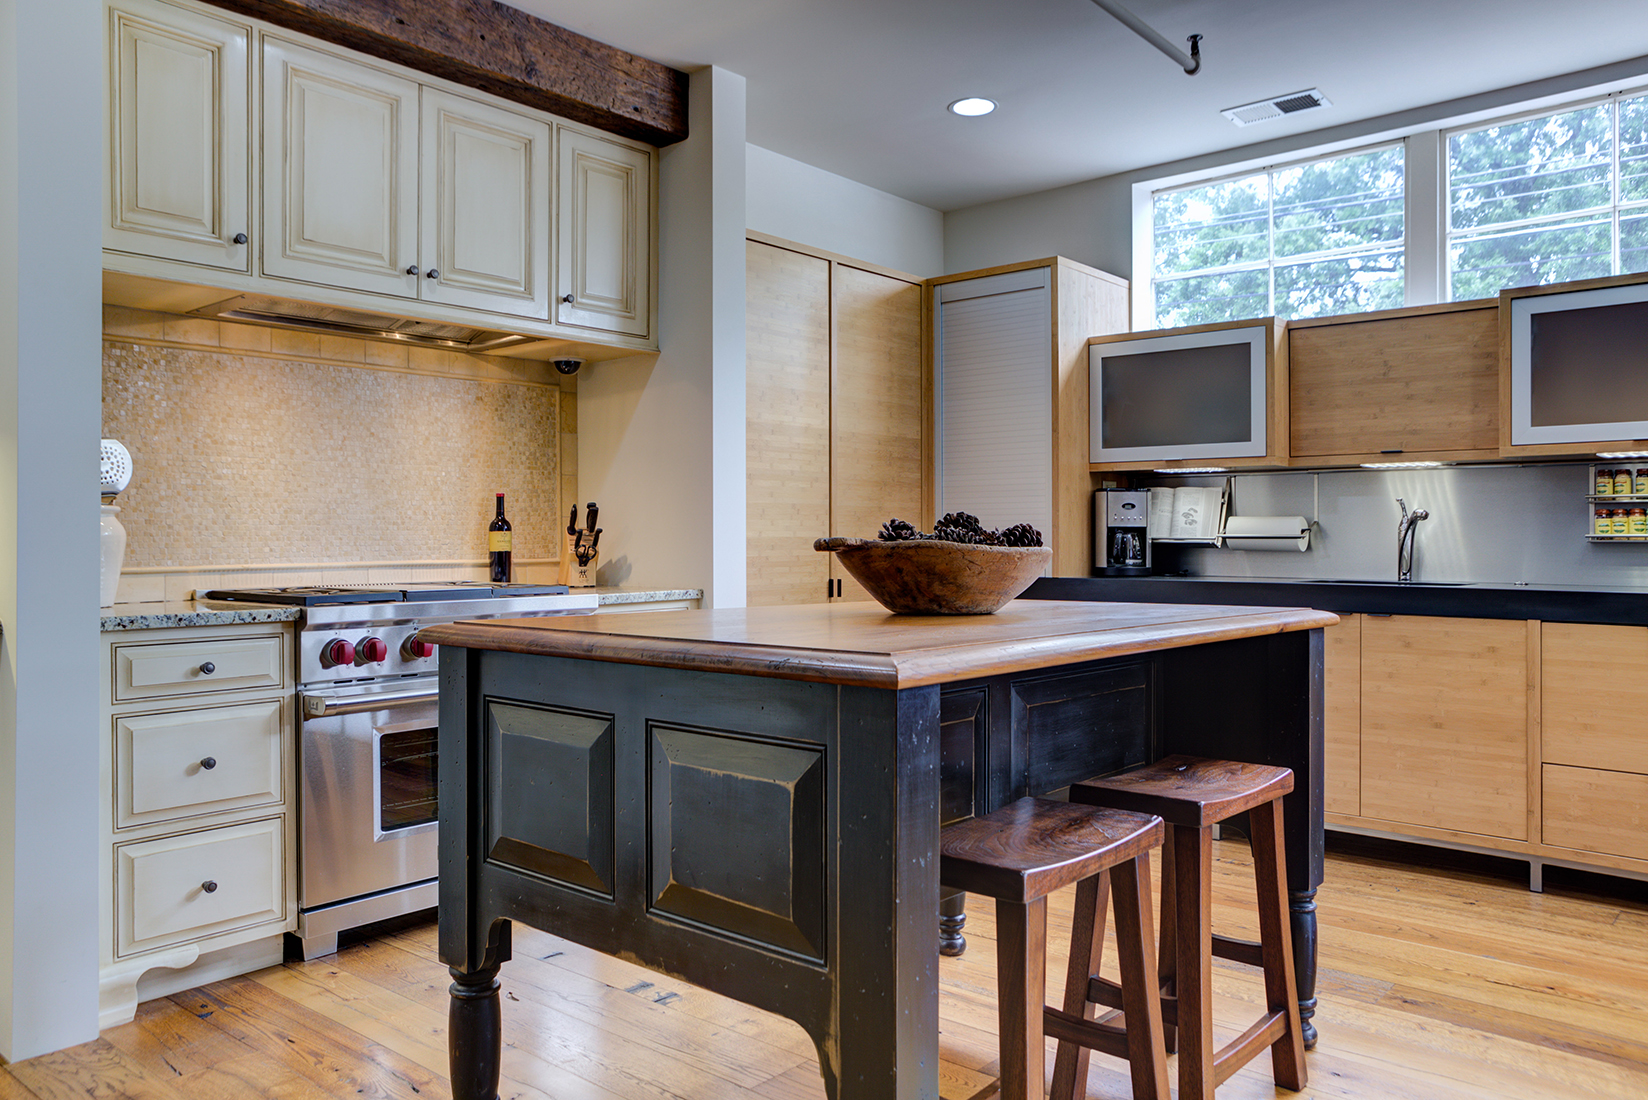 Midtown Cabinetry Millwork